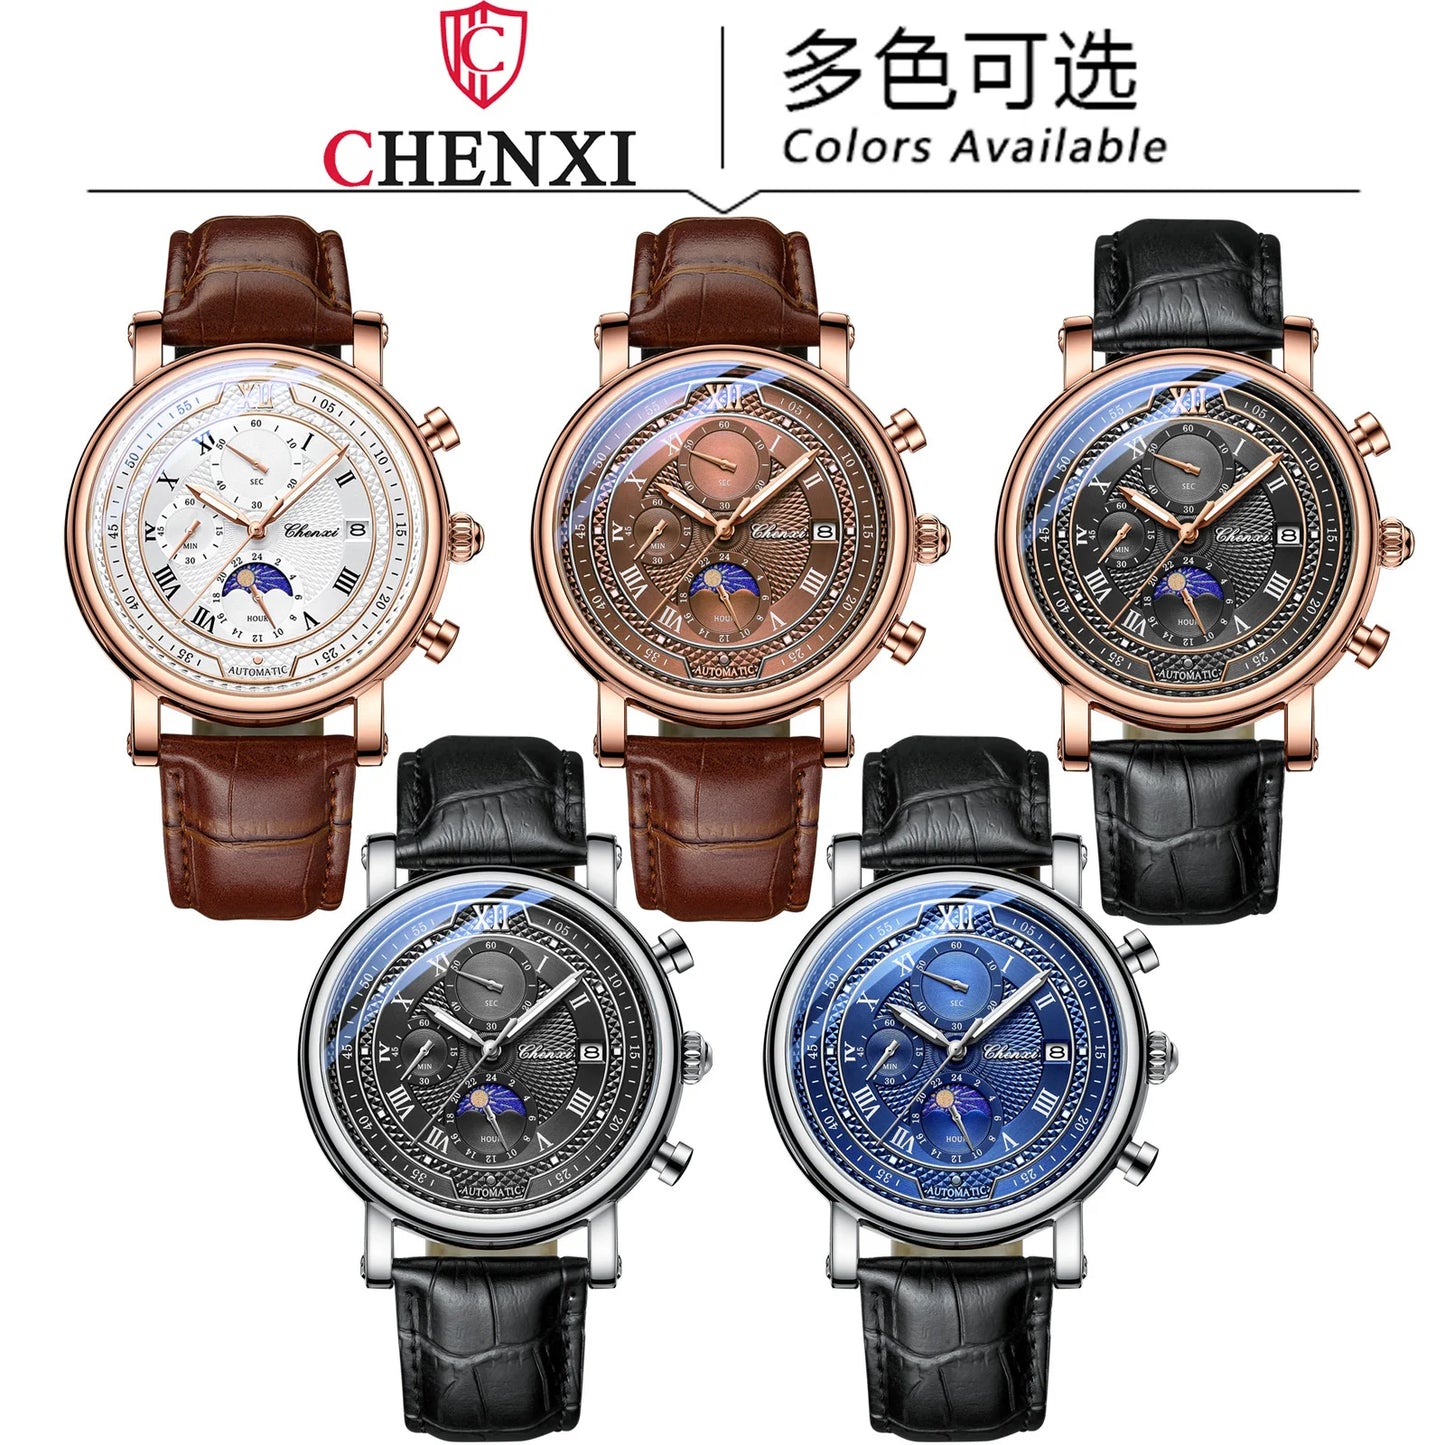 Chenxi 976 Leather Chronograph Date Men's Phase Of The Moon Timing Business Luminous Quartz Watch Relojes para hombres